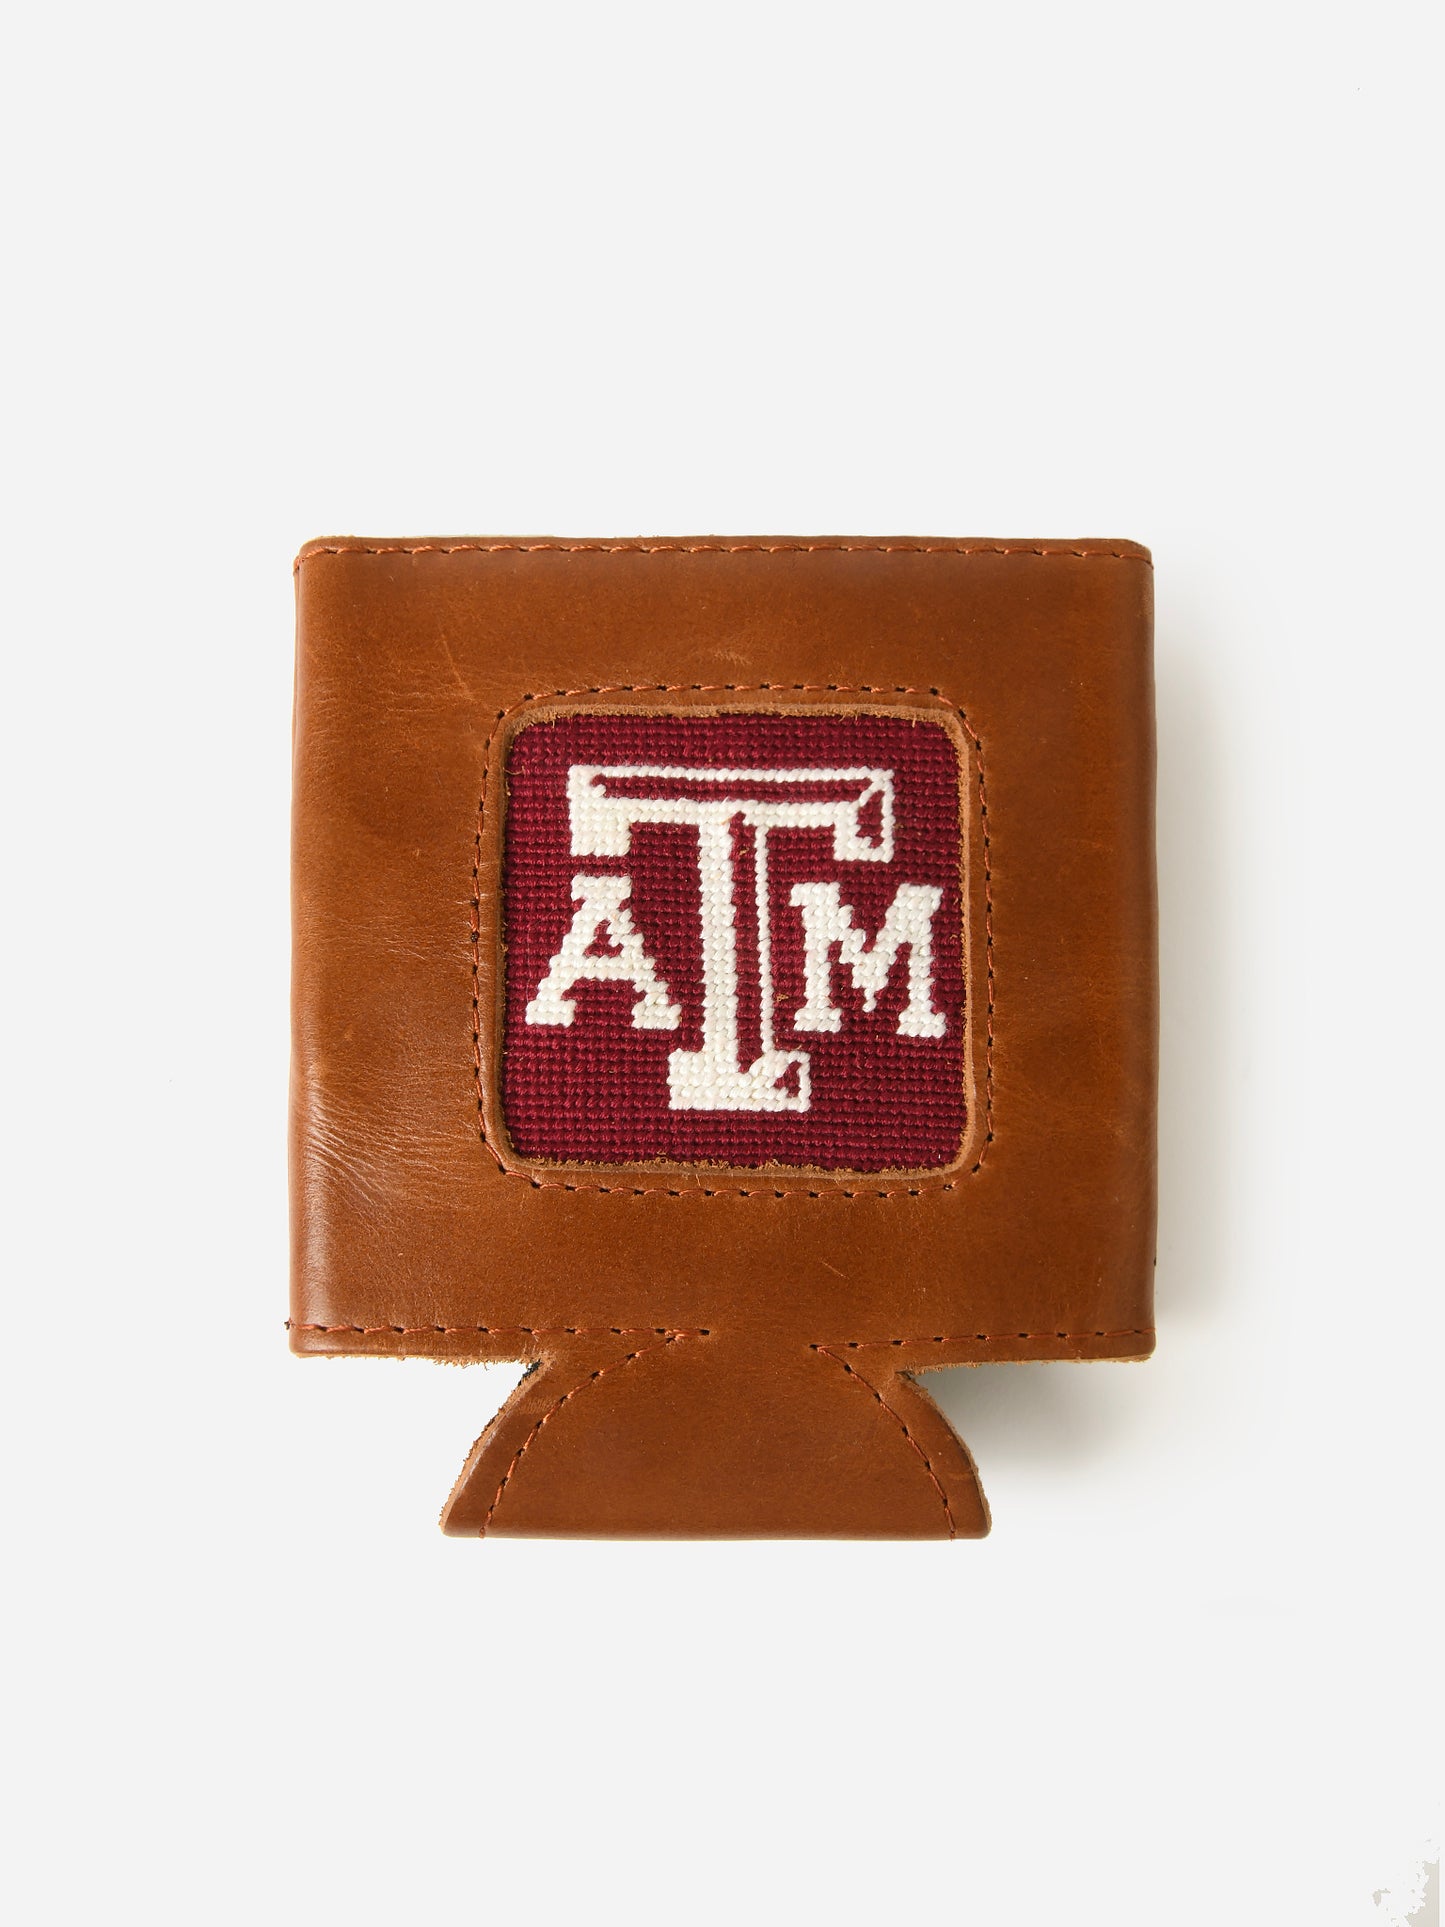 Smathers + Branson Texas A&M University Can Cooler